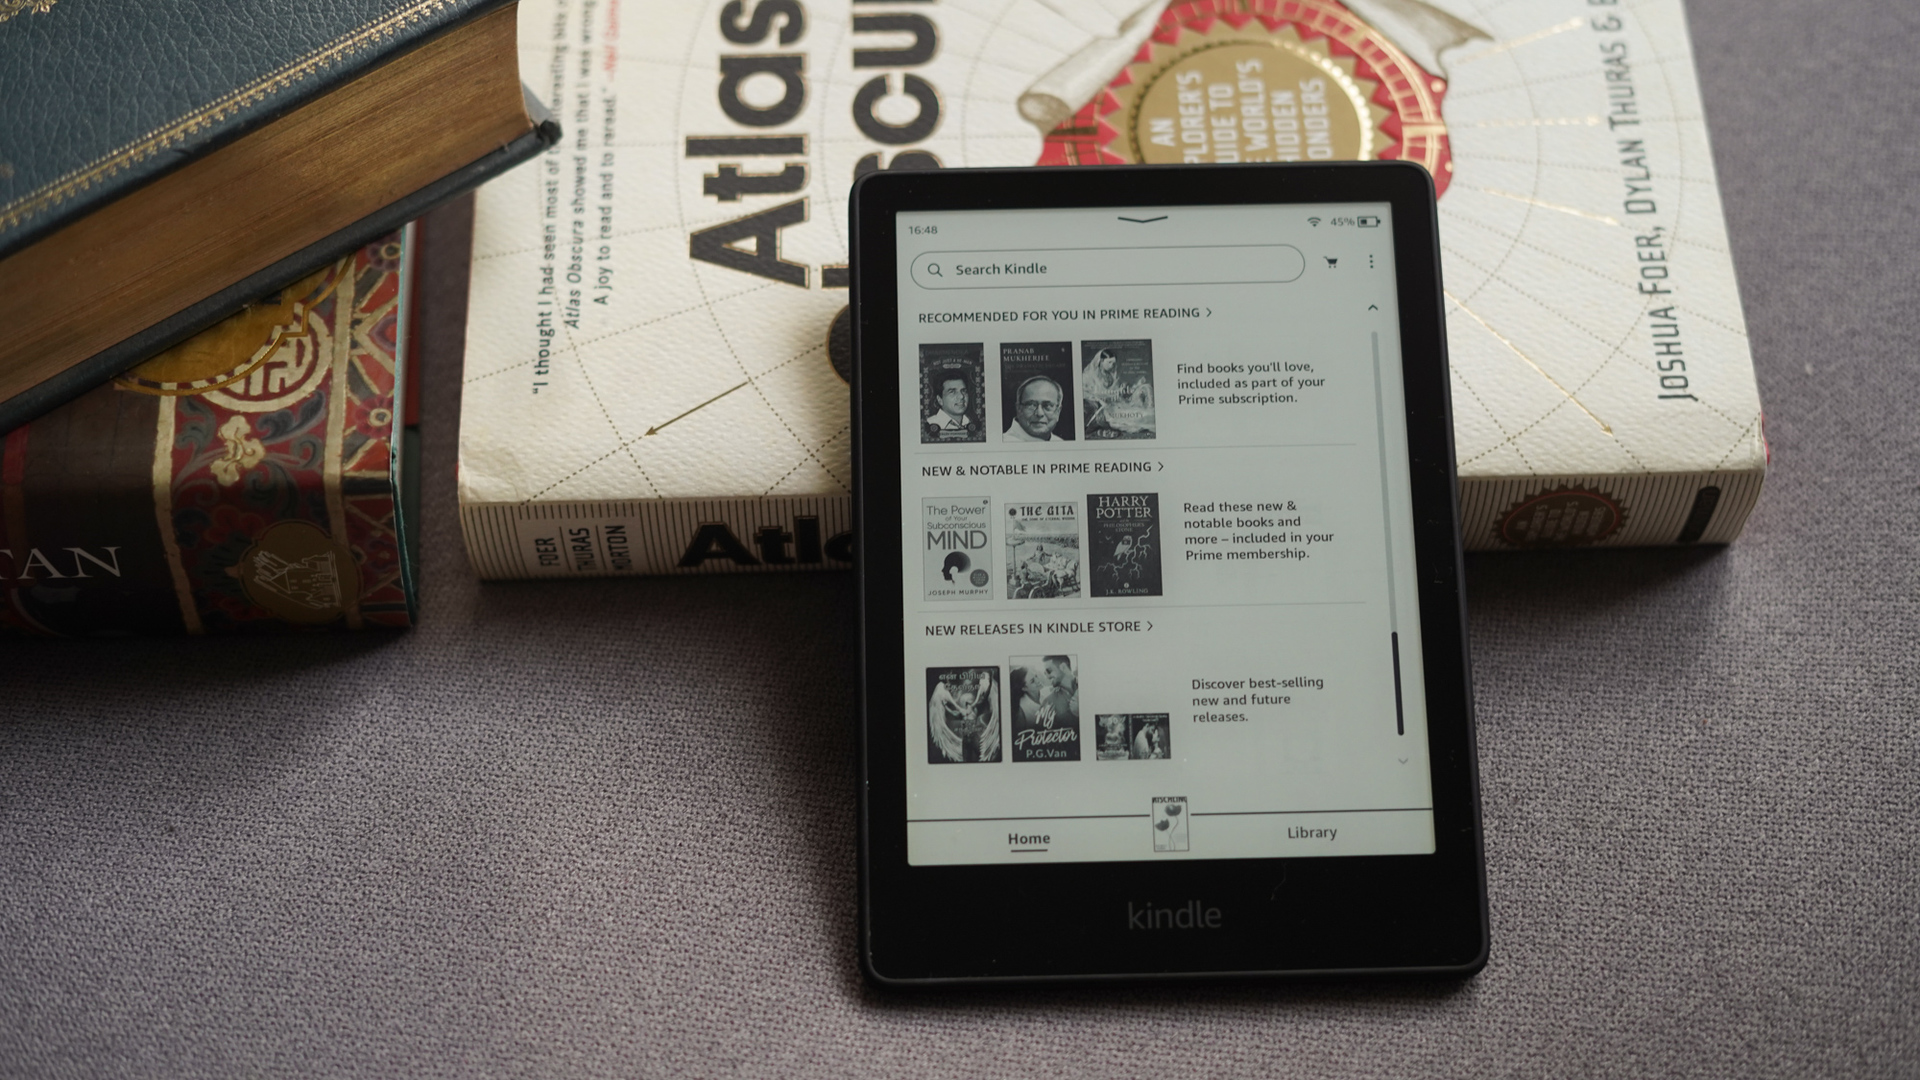 Kindle Paperwhite 2021 book recommendations from Amazon